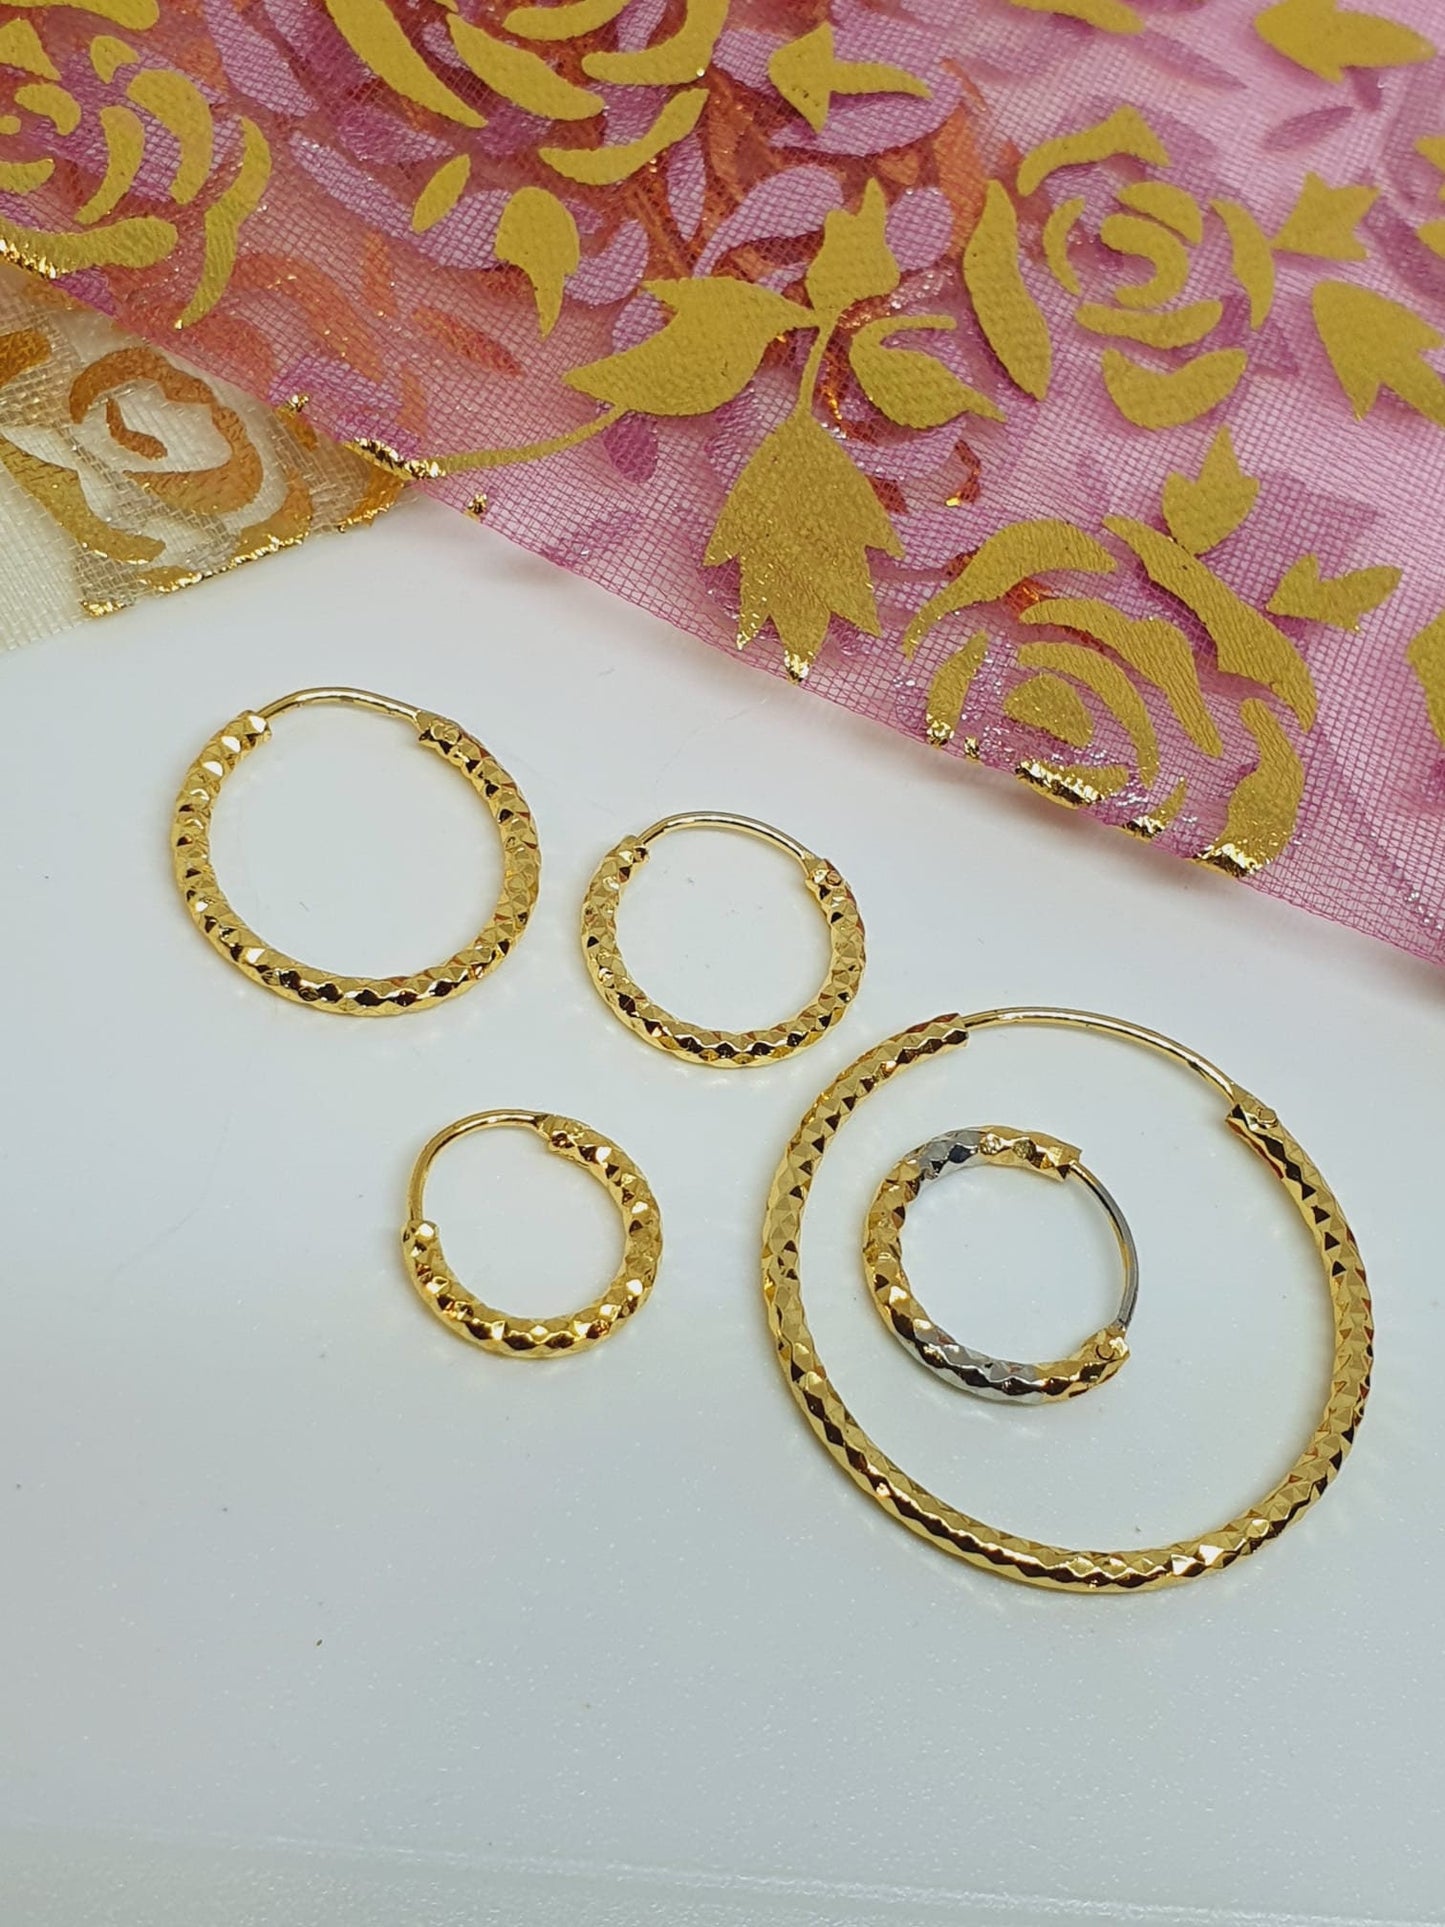 5 pieces Hoop Nose Ring Gold Silver Tone Bollywood Wedding Indian Jewelry Women Pierced Nose